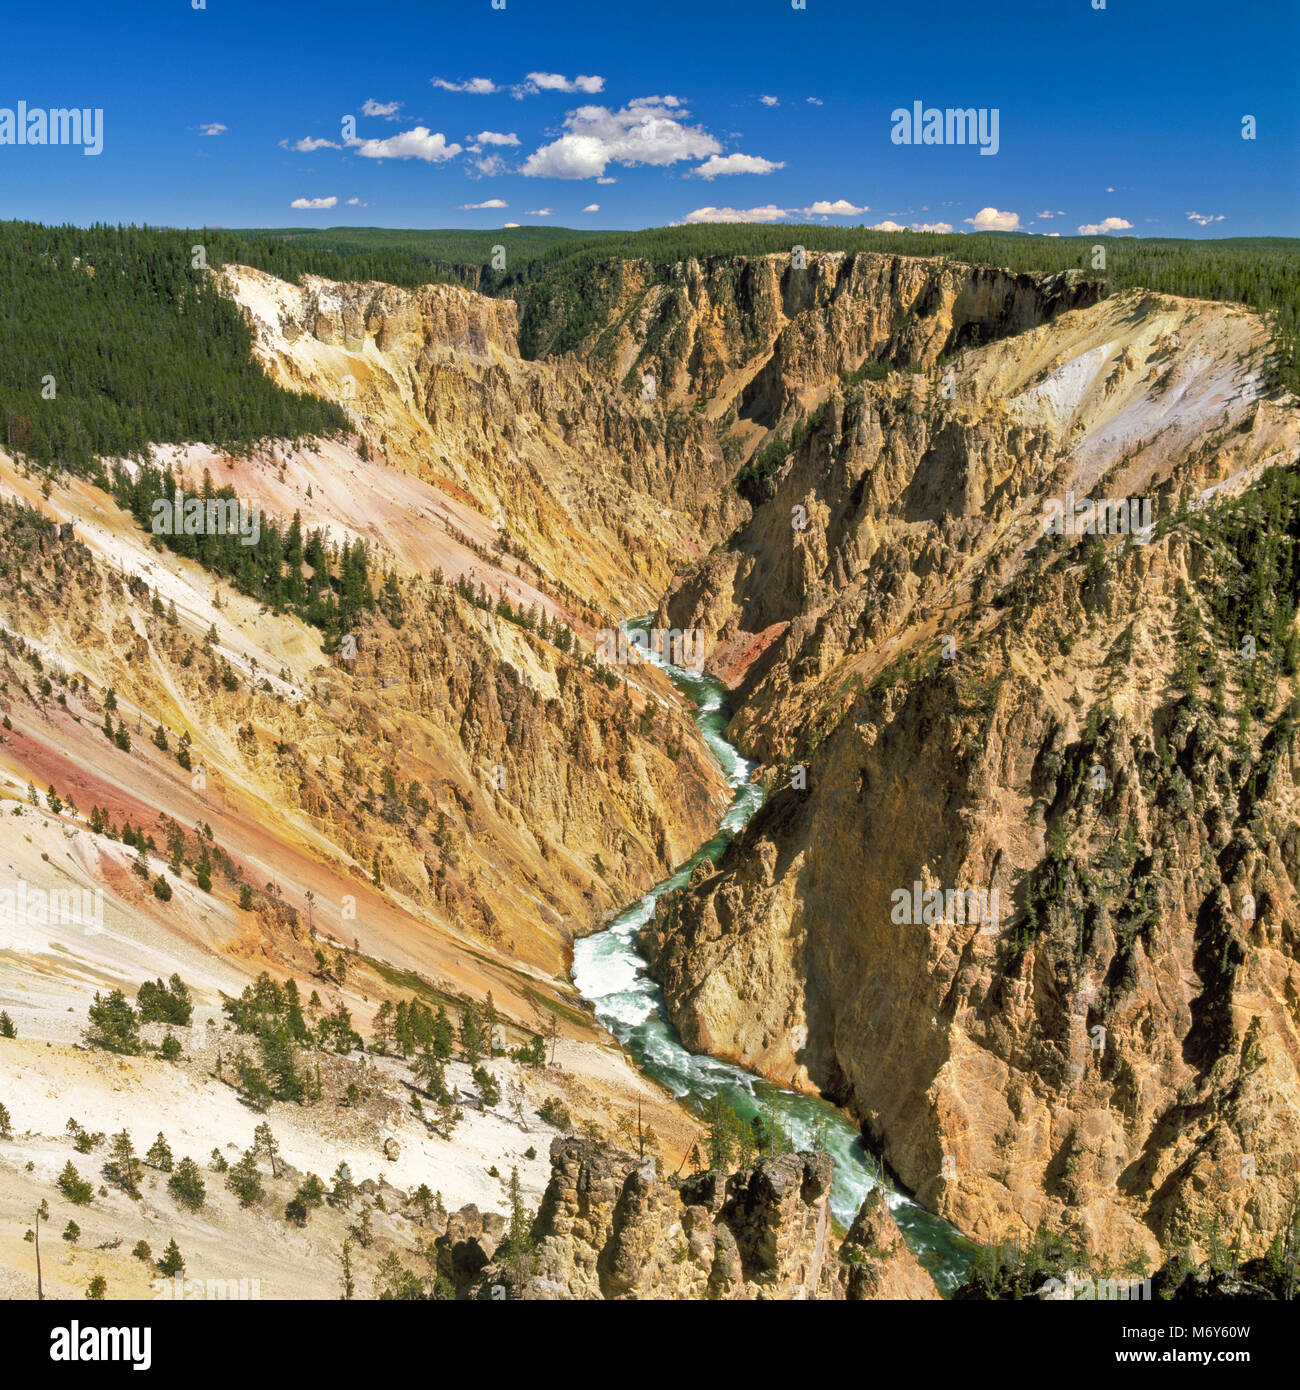 Grand canyon de la Yellowstone river in Yellowstone National Park, Wyoming Banque D'Images